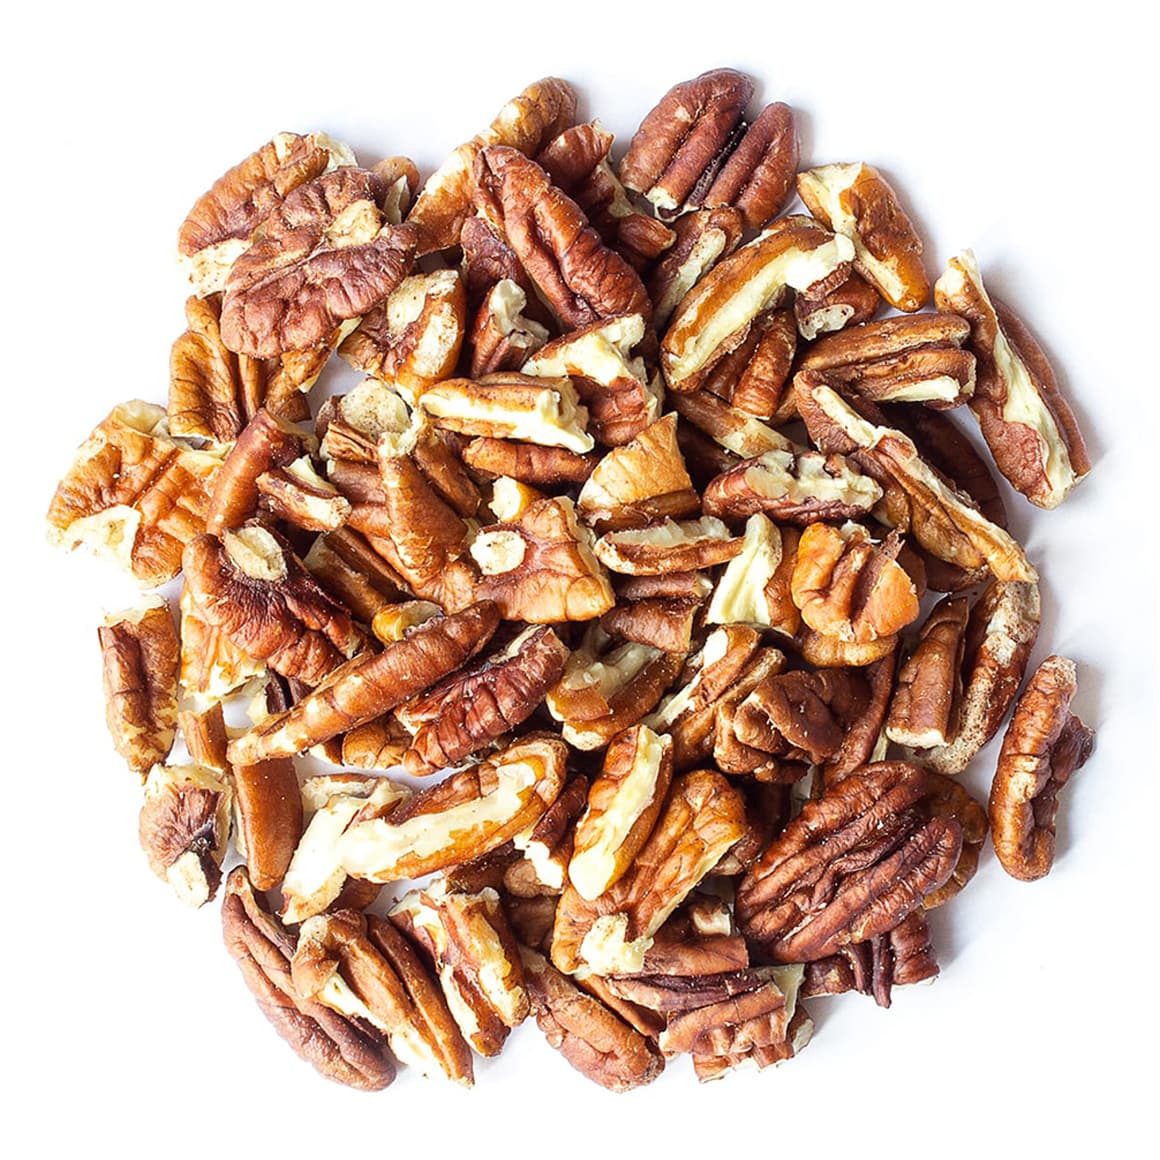 Organic Pecan Pieces Buy in Bulk from Food to Live